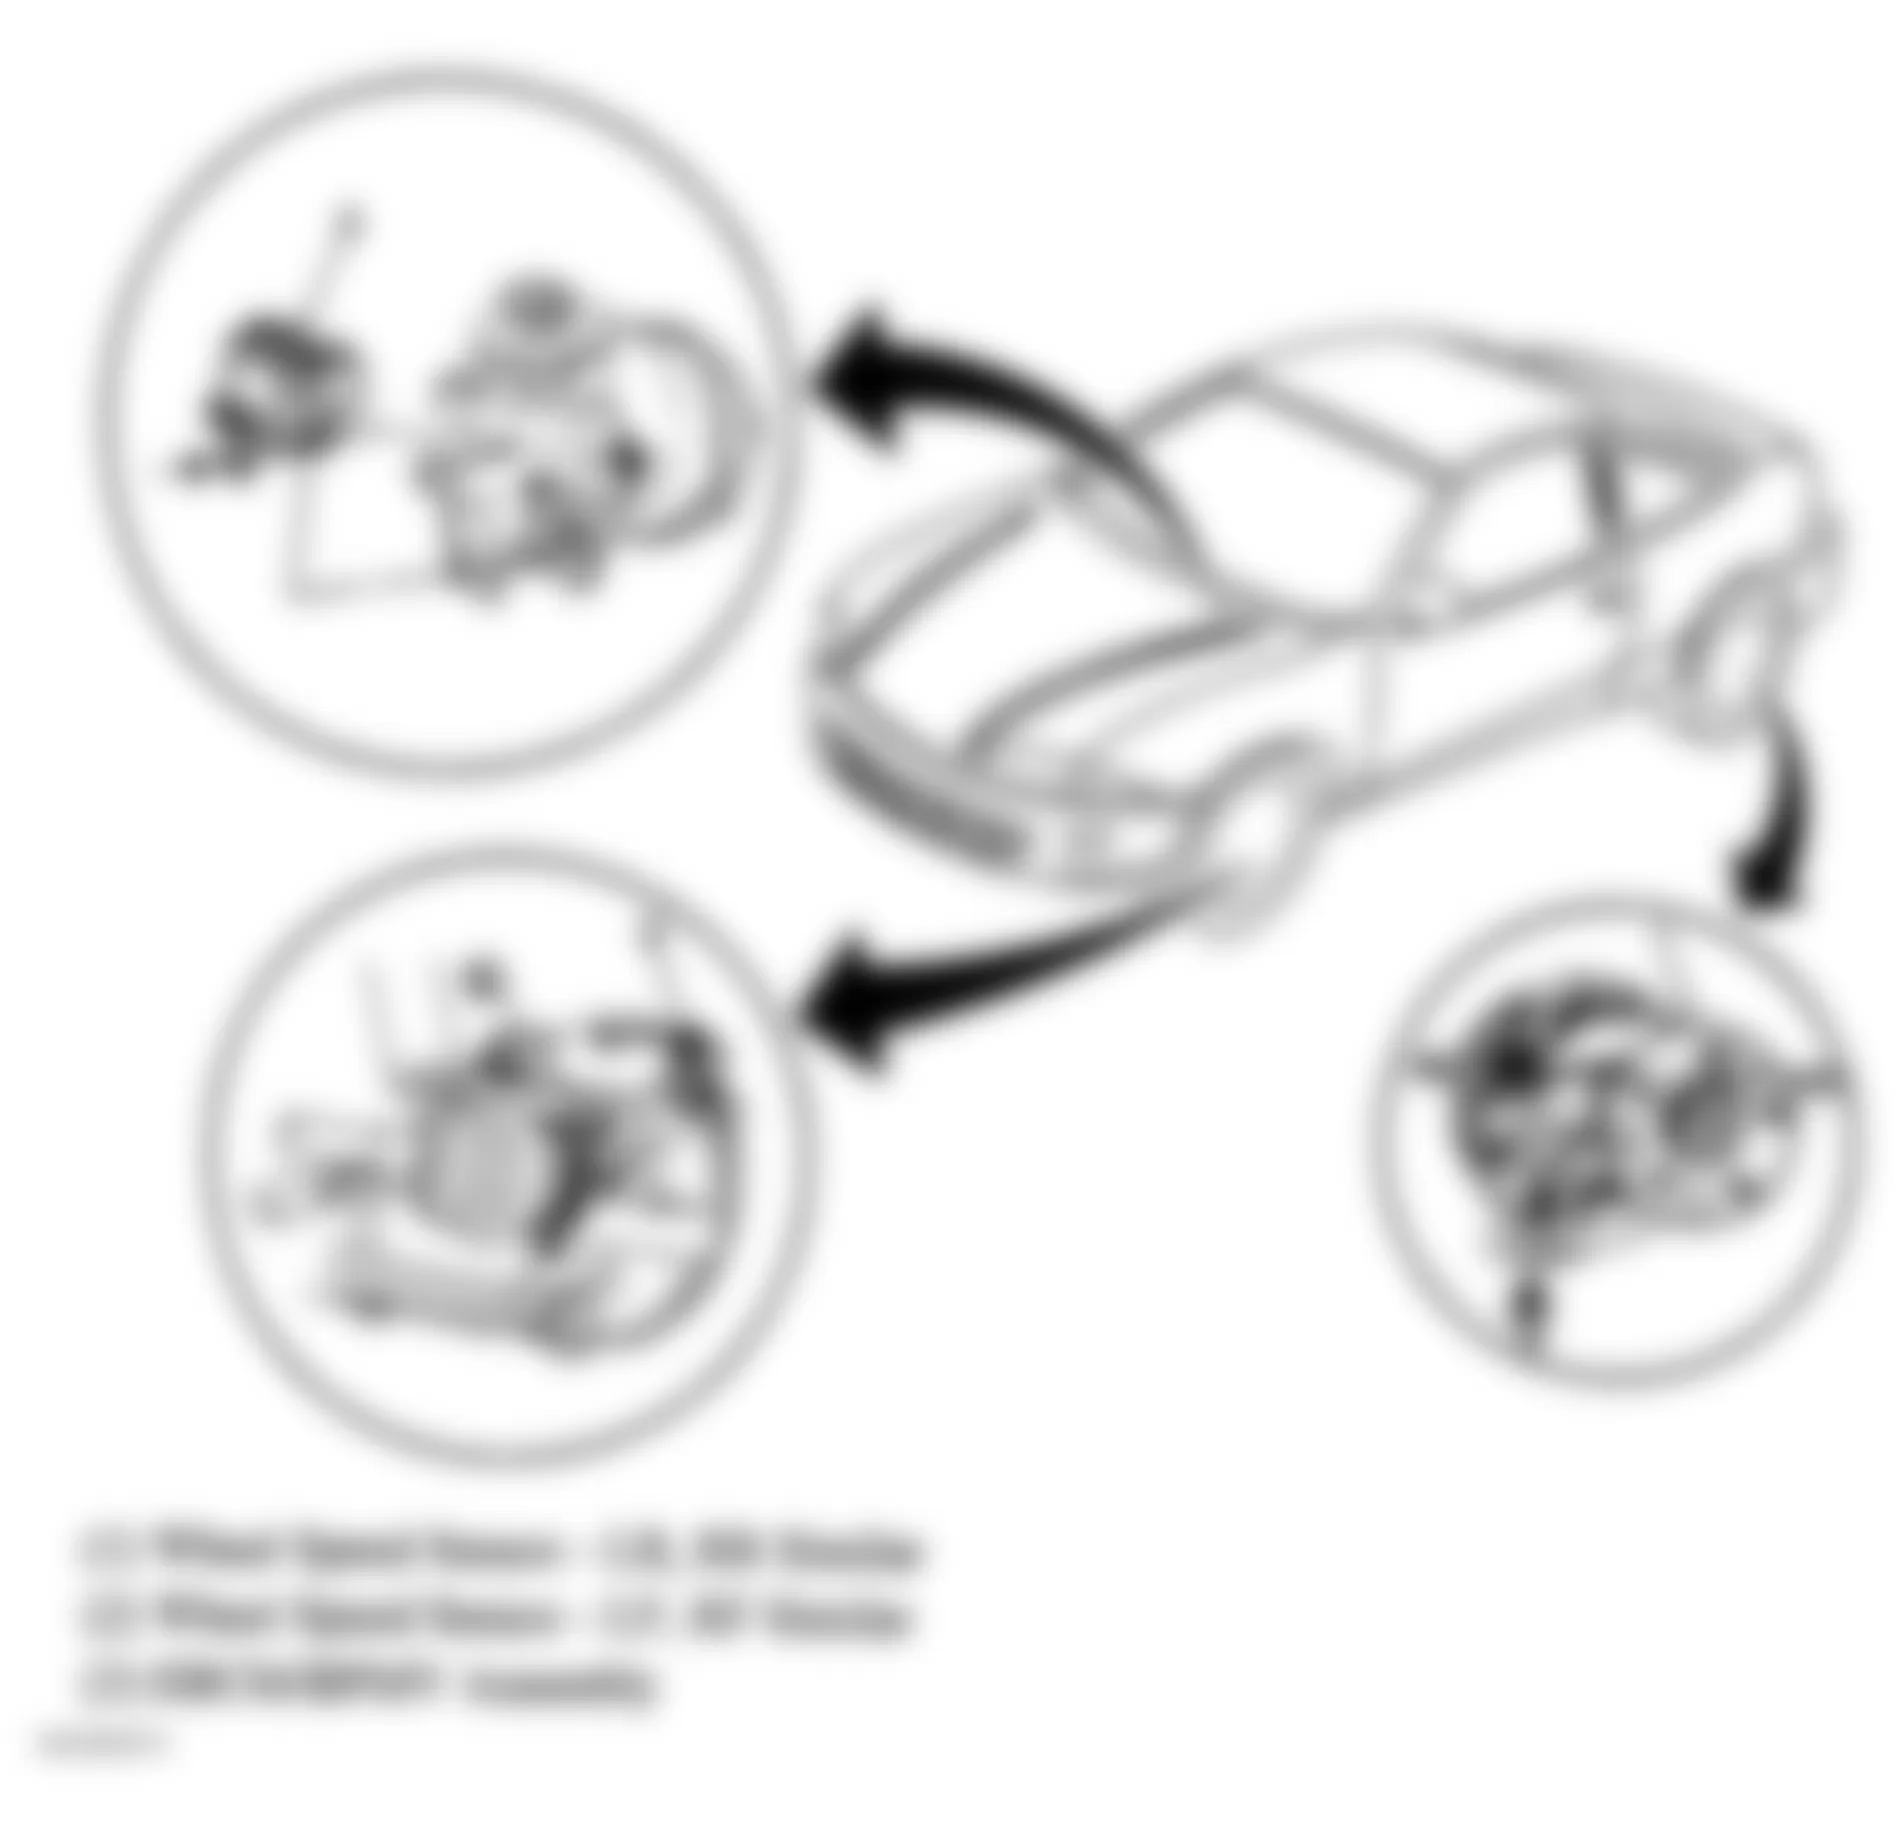 Chevrolet Cavalier LS Sport 2004 - Component Locations -  Left Front Steering Knuckle, Left Rear Wheel Hub & Left Rear Of Engine Compartment